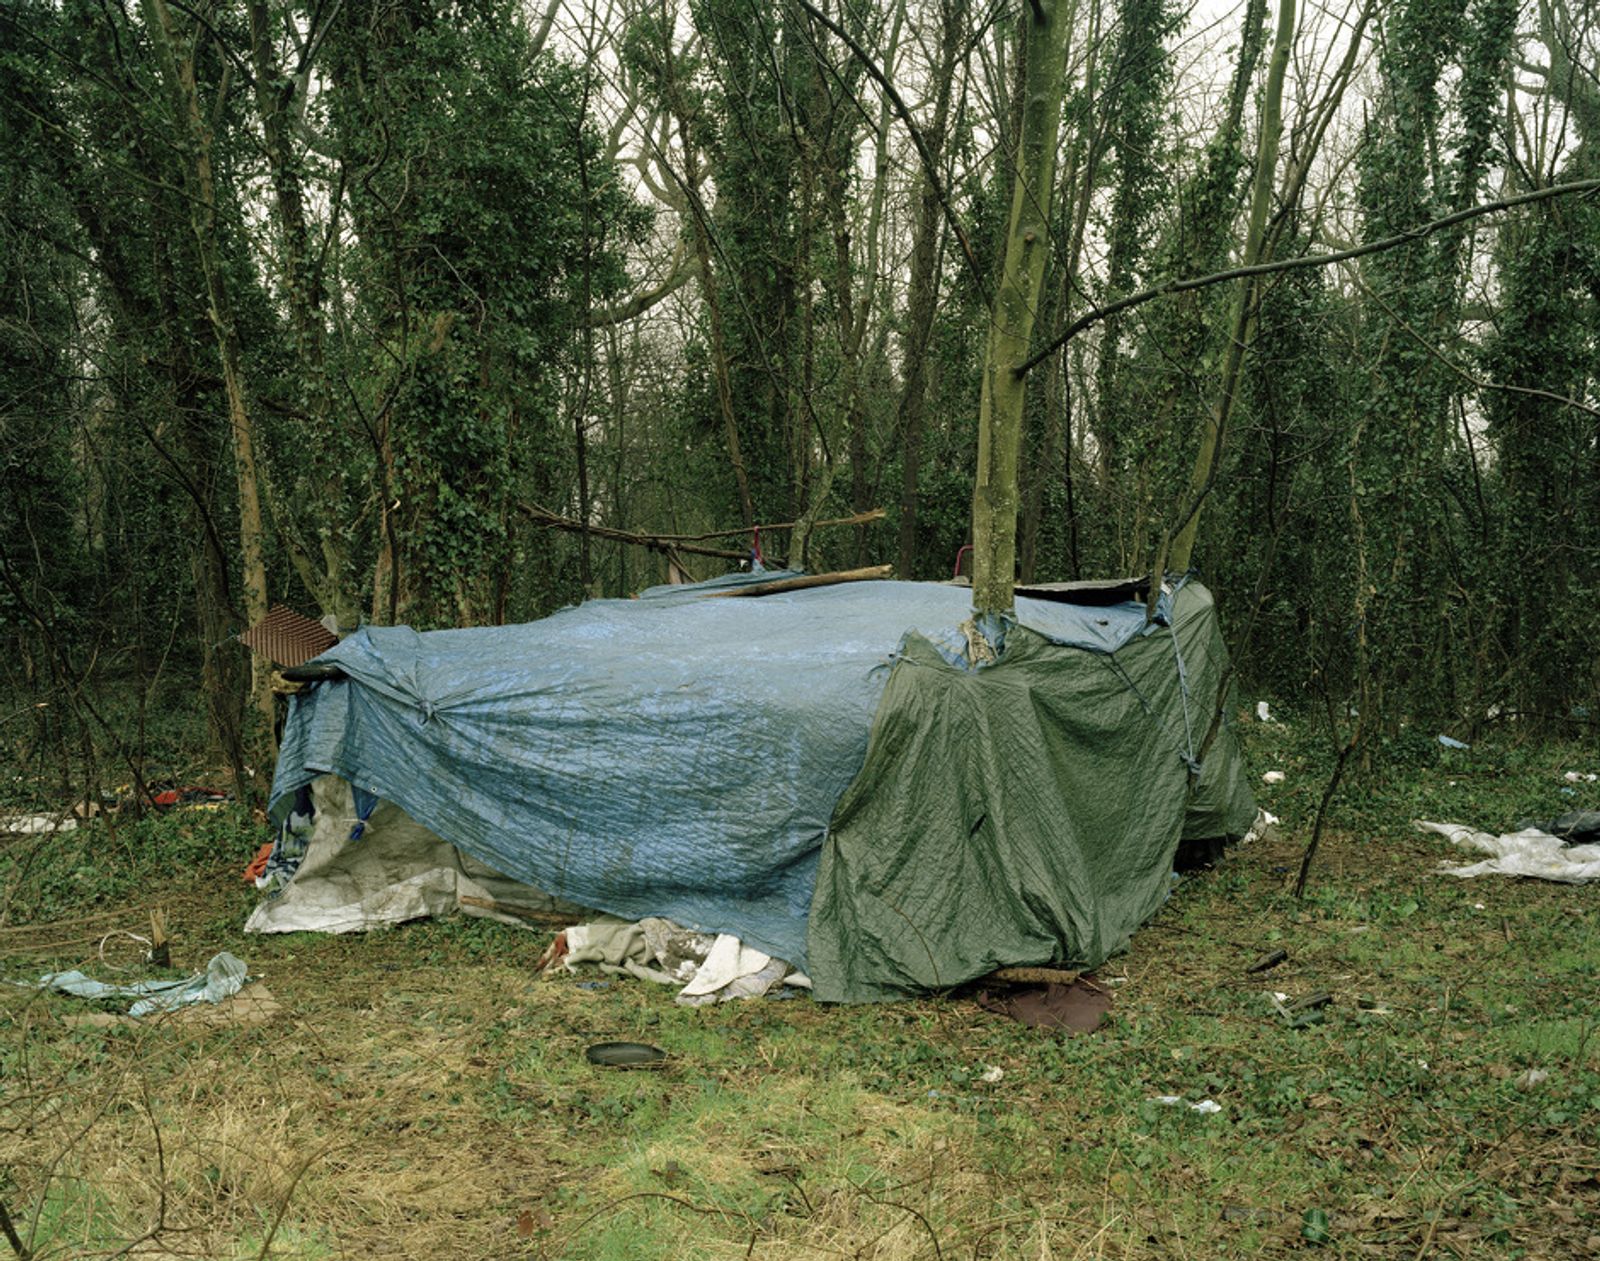 © Henk Wildschut - Shelter of Illegal immigrants in France